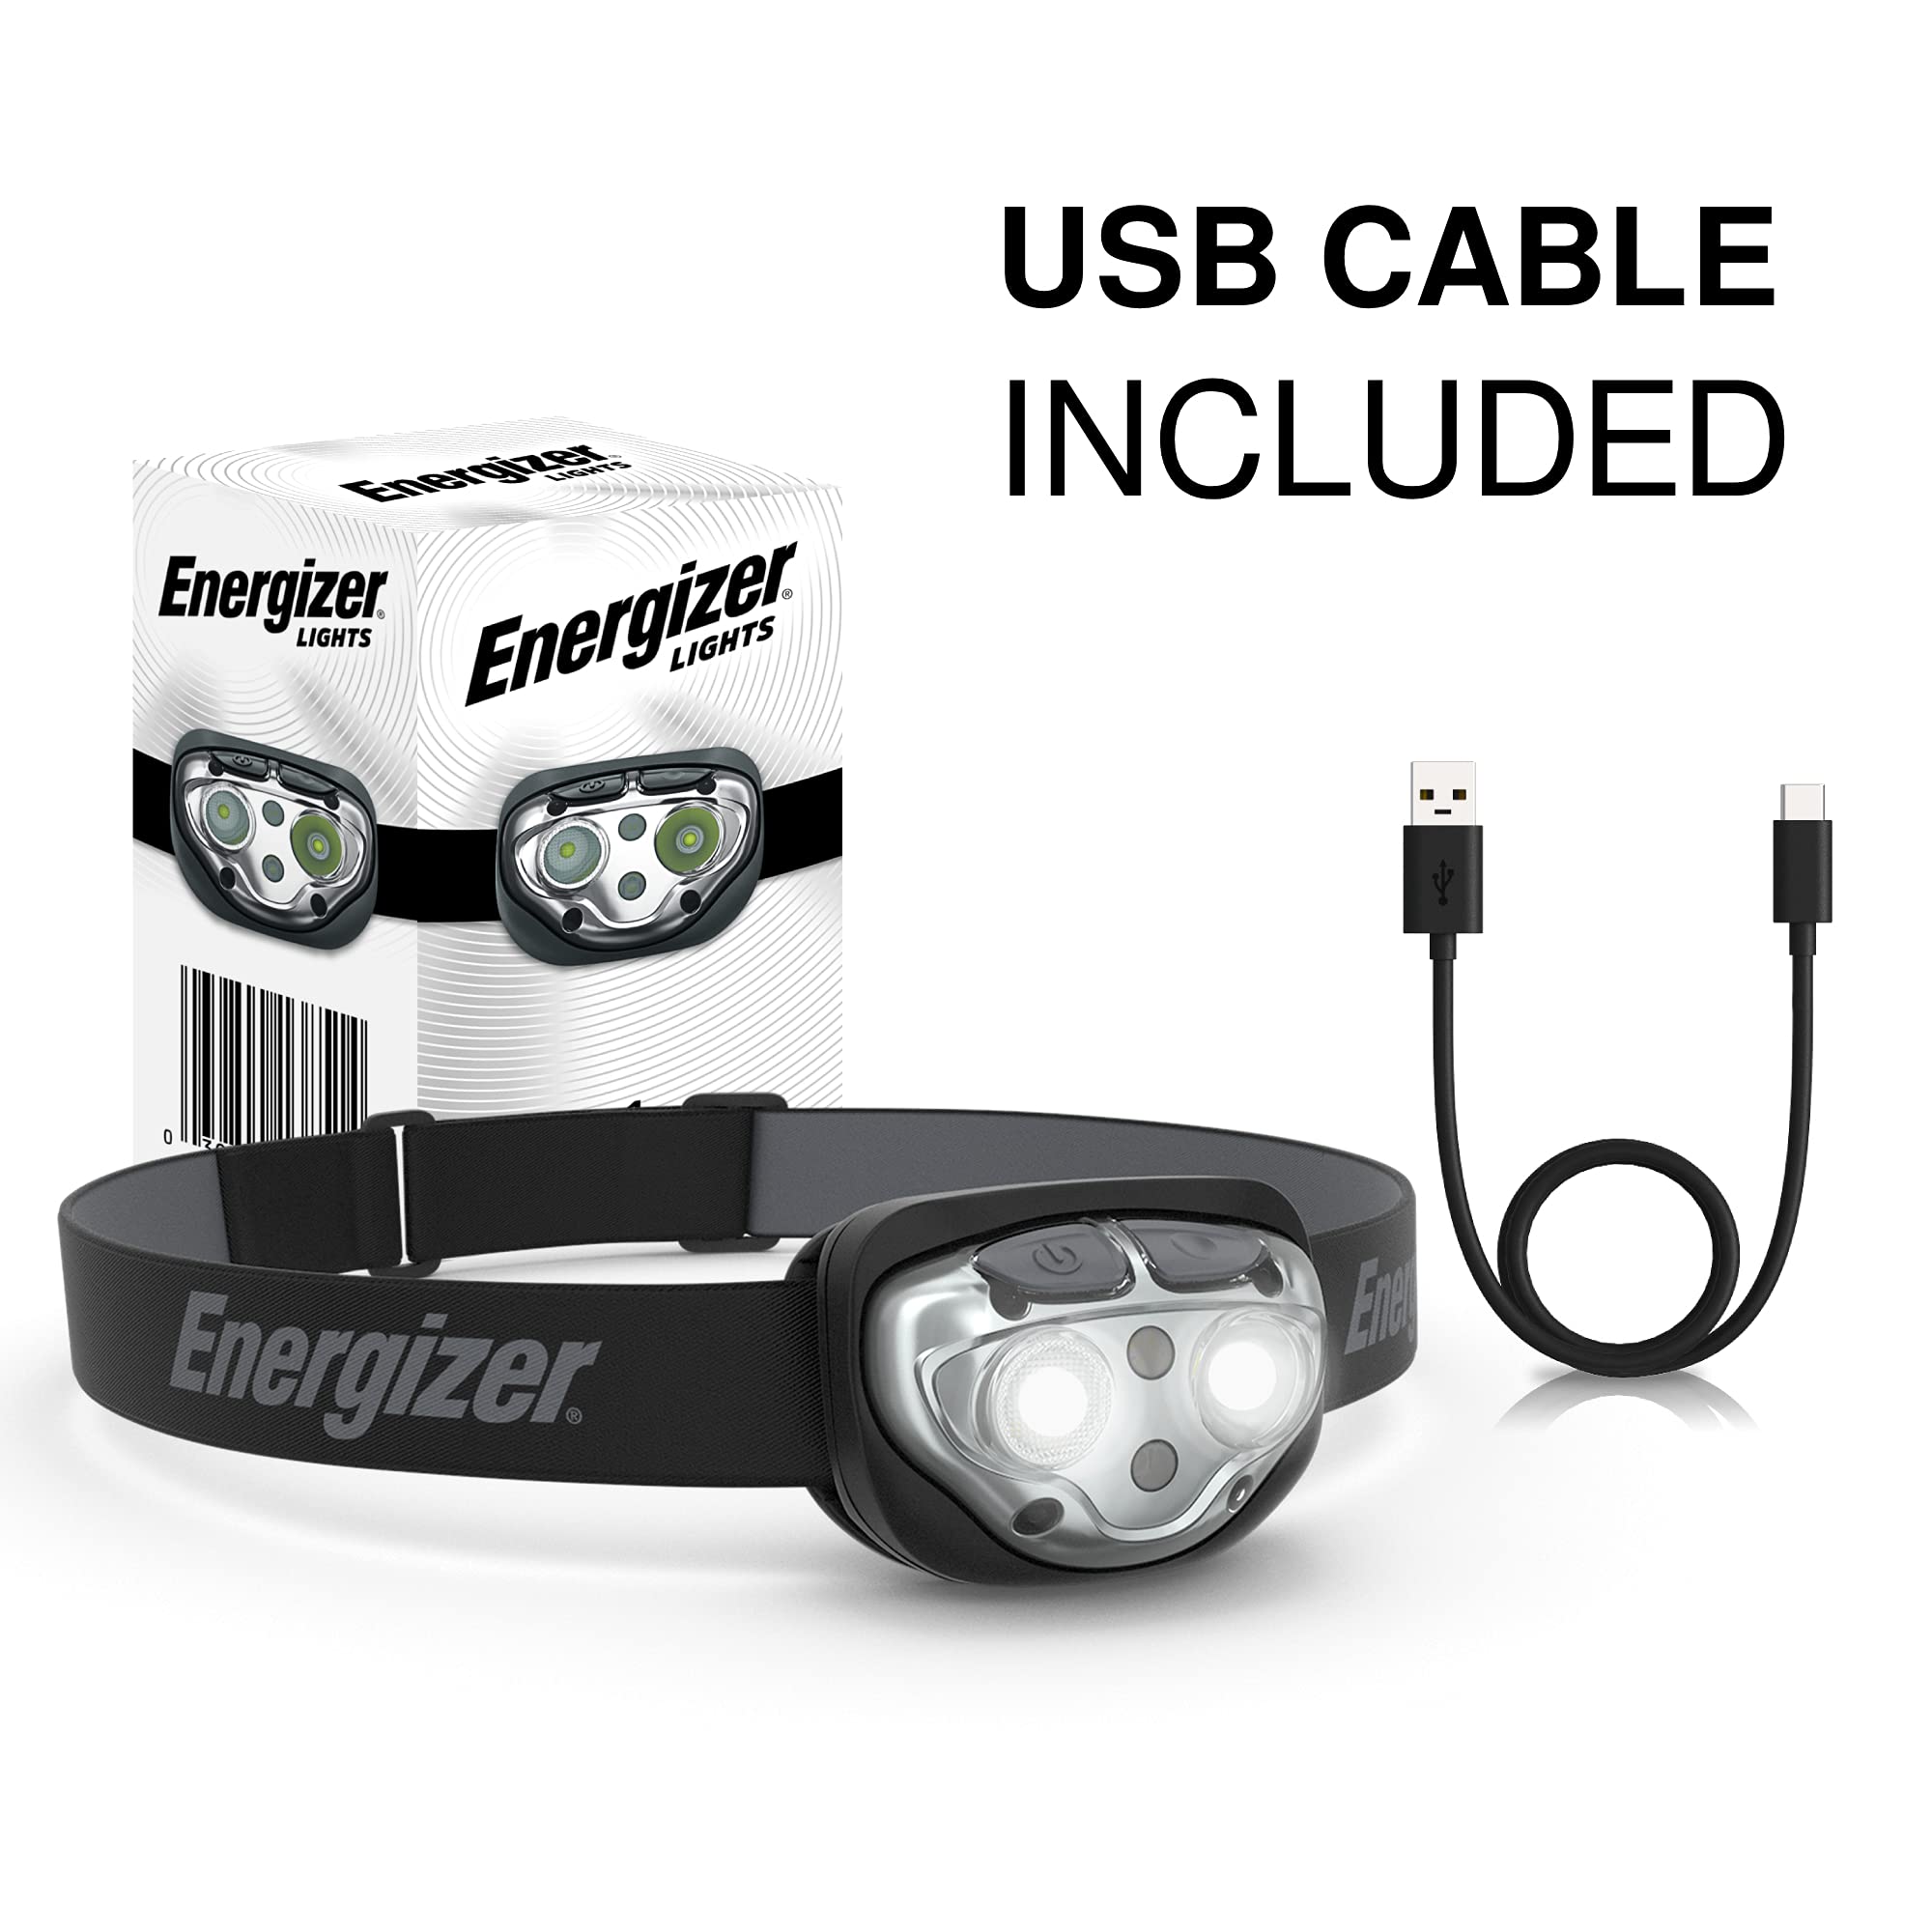 Energizer Rechargeable LED Headlamp Pro400, IPX4 Water Resistant, High-Powered Bright LED, Multiple Light Modes, Best Headlight for Camping, Running, Outdoors, Emergency Light, USB Included